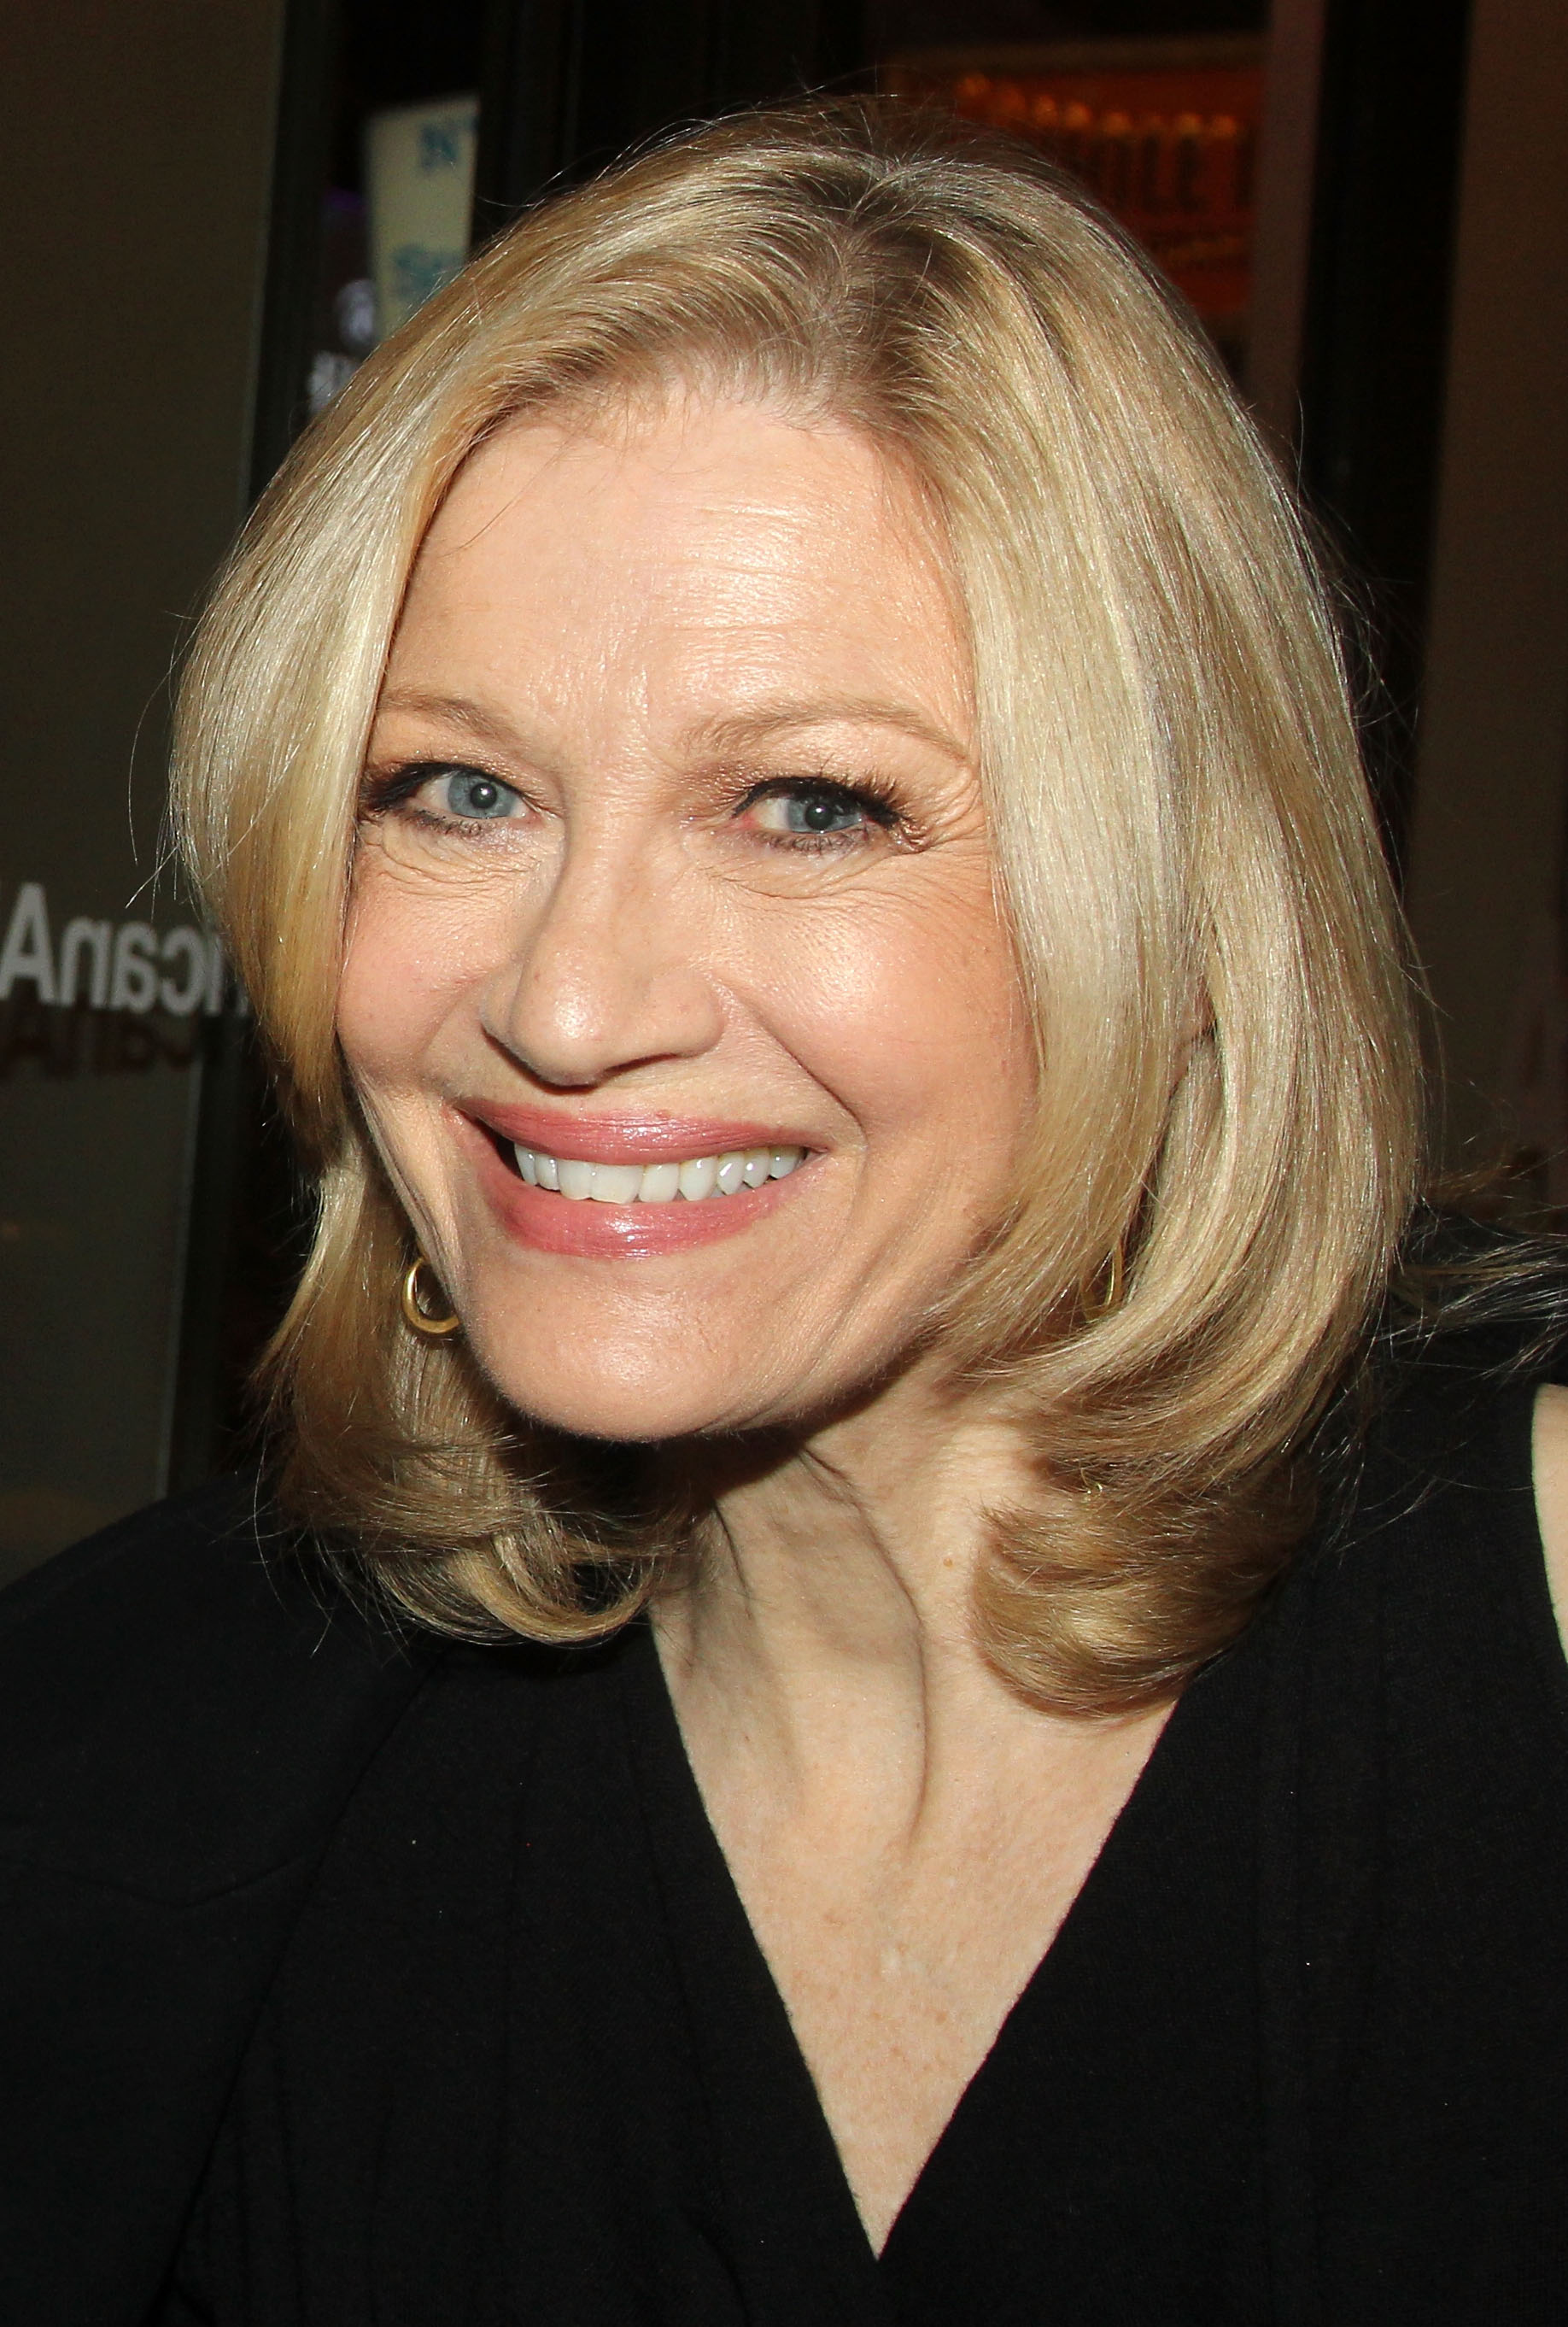 Diane Sawyer at The Opening Night of "The Real Thing" in New York City on Oct. 30, 2014.